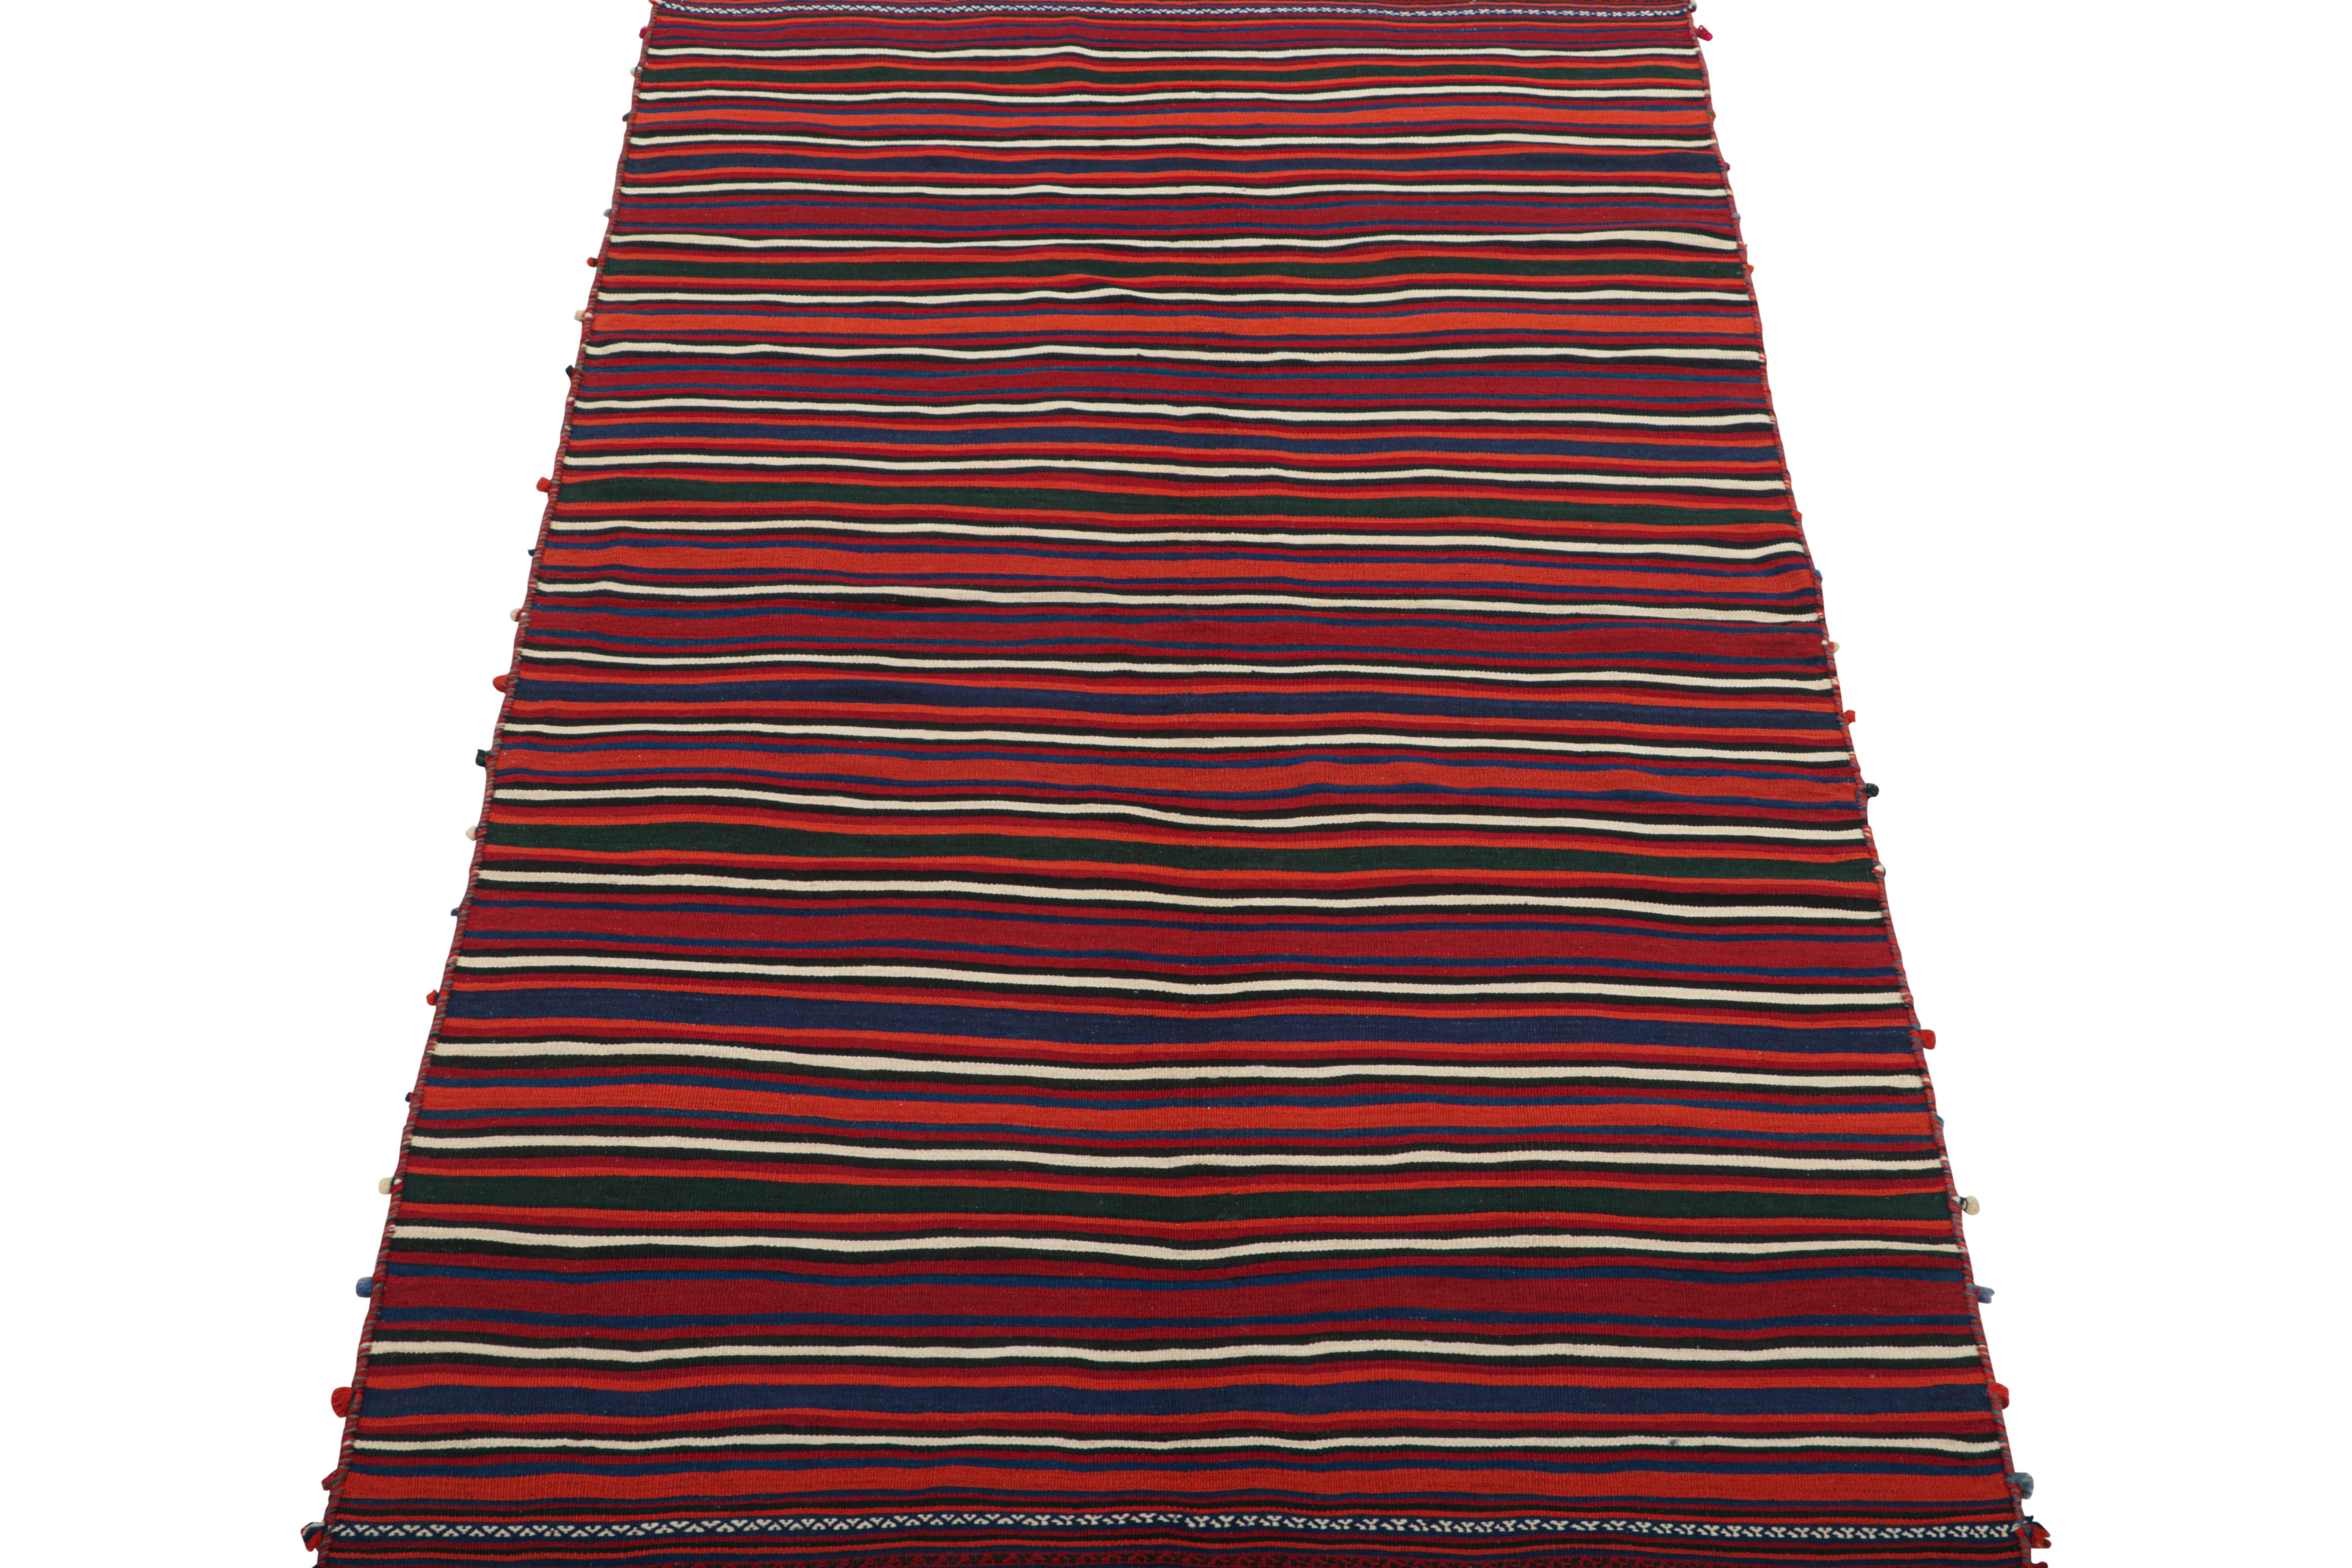 This vintage 6x10 Persian Kilim is a midcentury tribal runner, handwoven in wool circa 1950-1960.

On the Design: 

Its design prefers navy blue and burgundy red stripes with black and off-white notes in a continuous positive-negative theme.